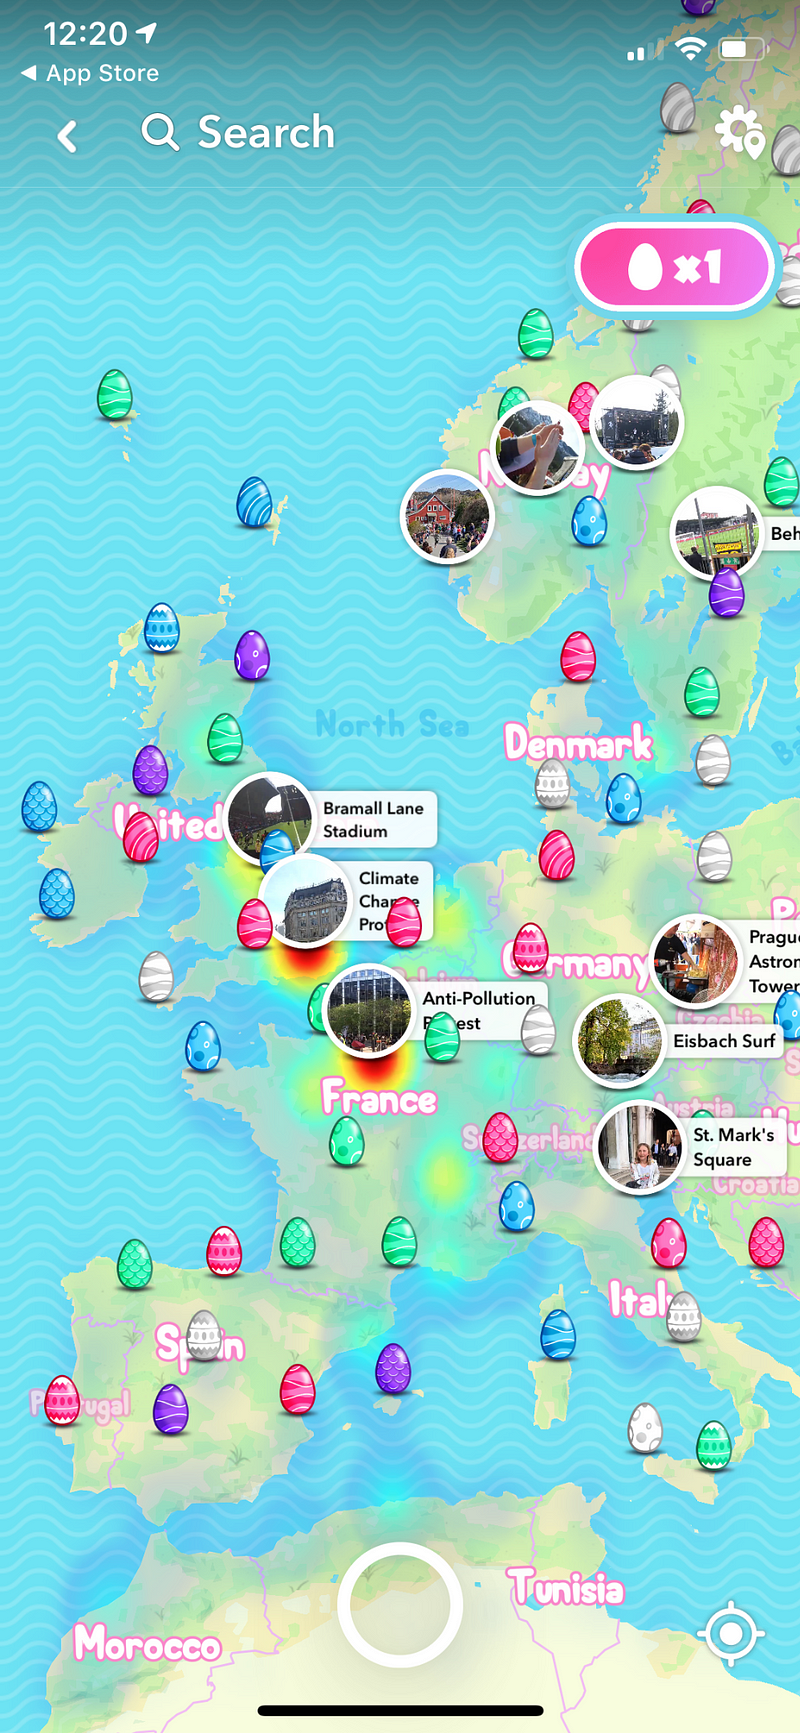 Snapchat’s 2019 Egg Hunt is on Points of interest